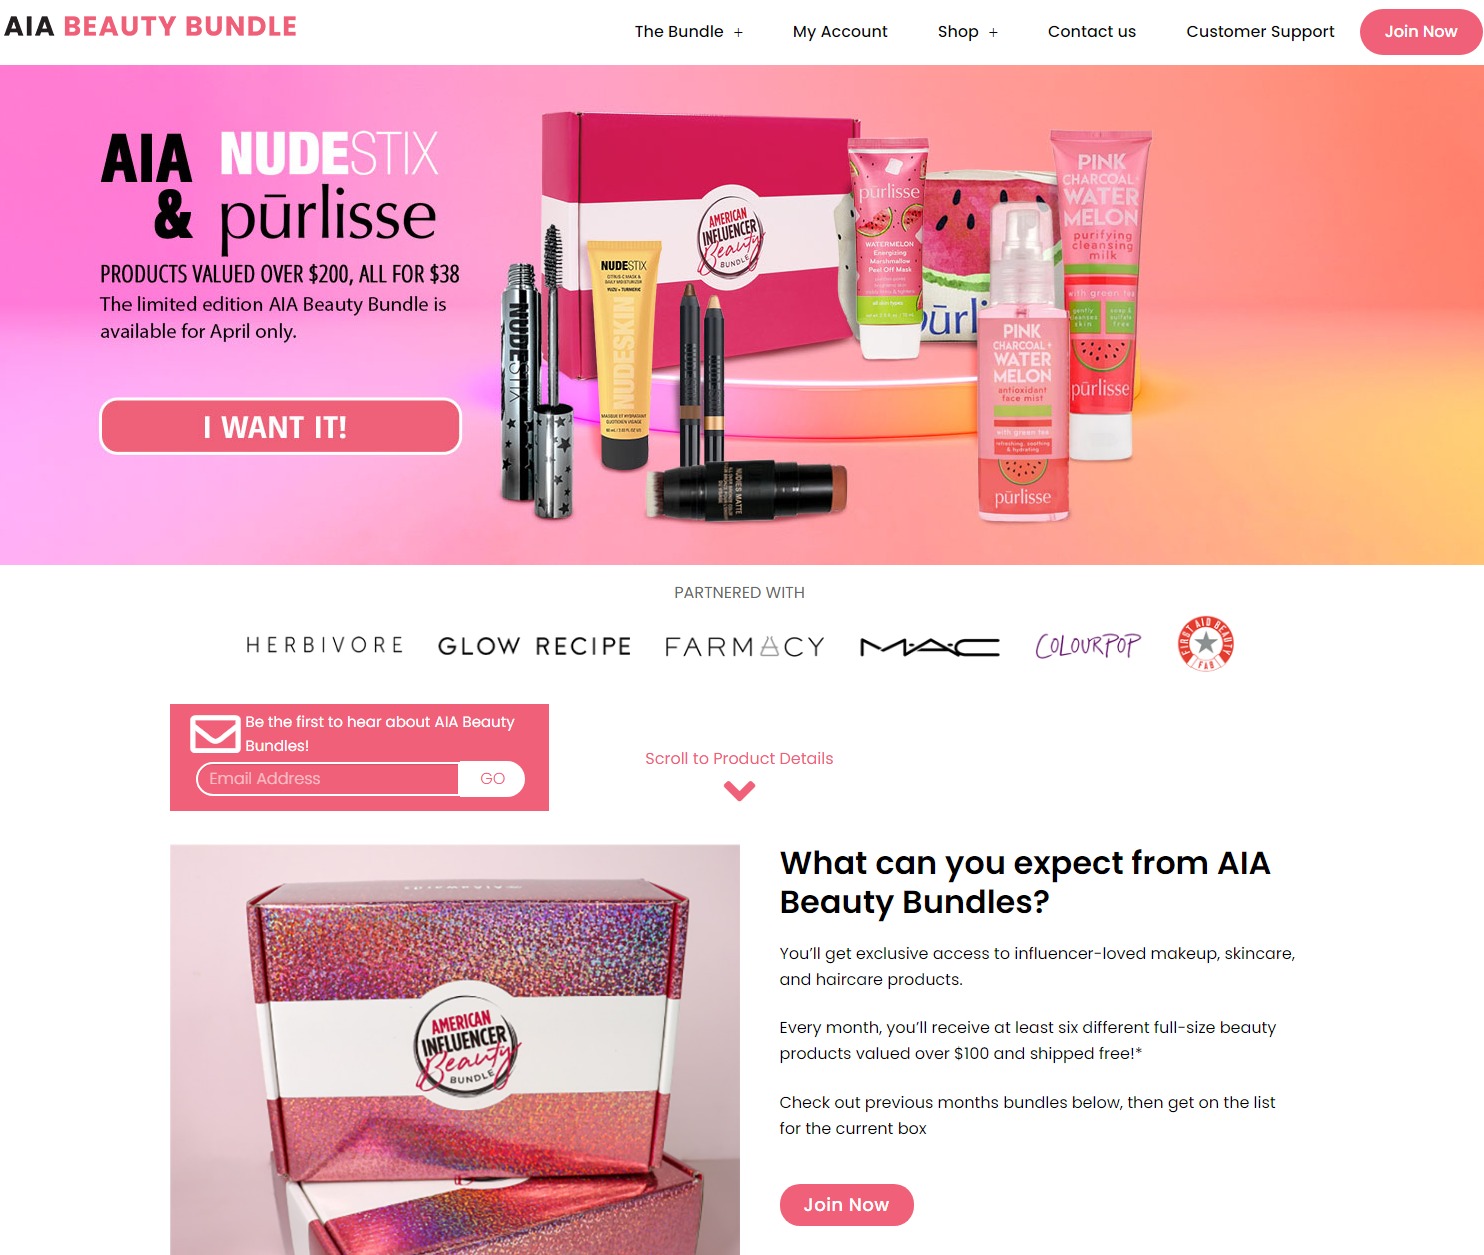 Screenshot from AIA Beauty Bundle's homepage, showing the monthly subscription deal